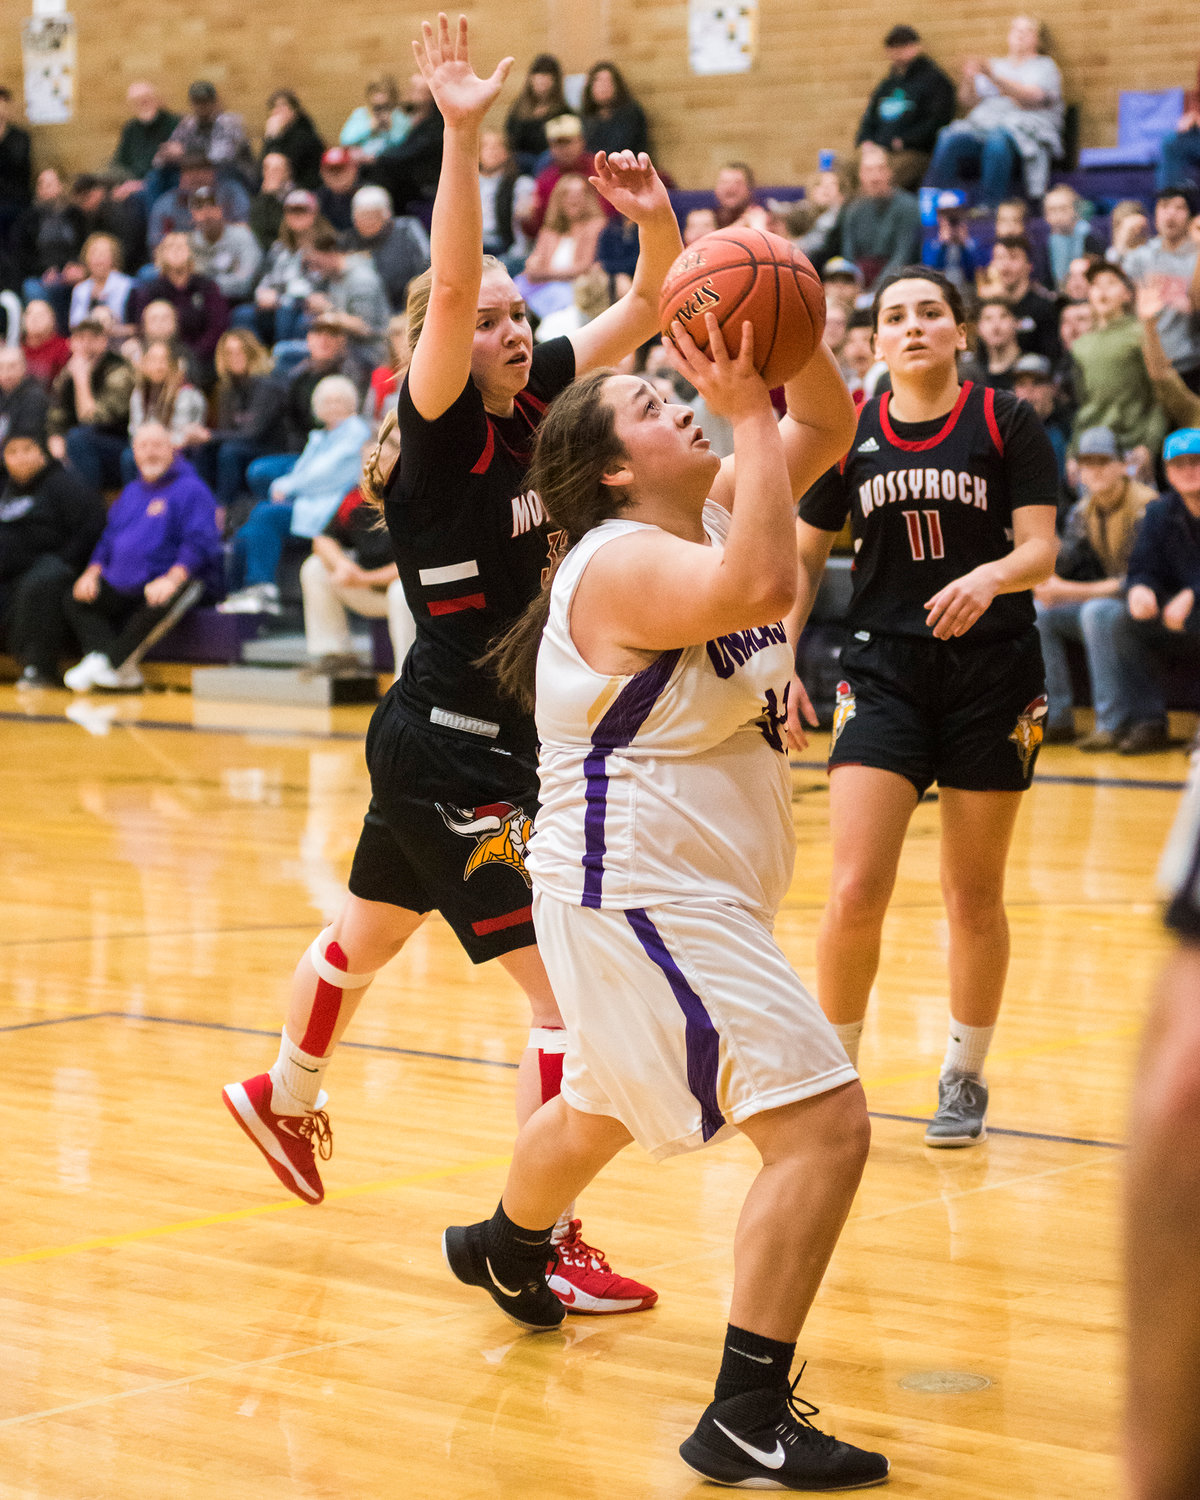 Images from a Central 2B girls basketball game between Onalaska and Mossyrock played Thursday night in Onalaska.